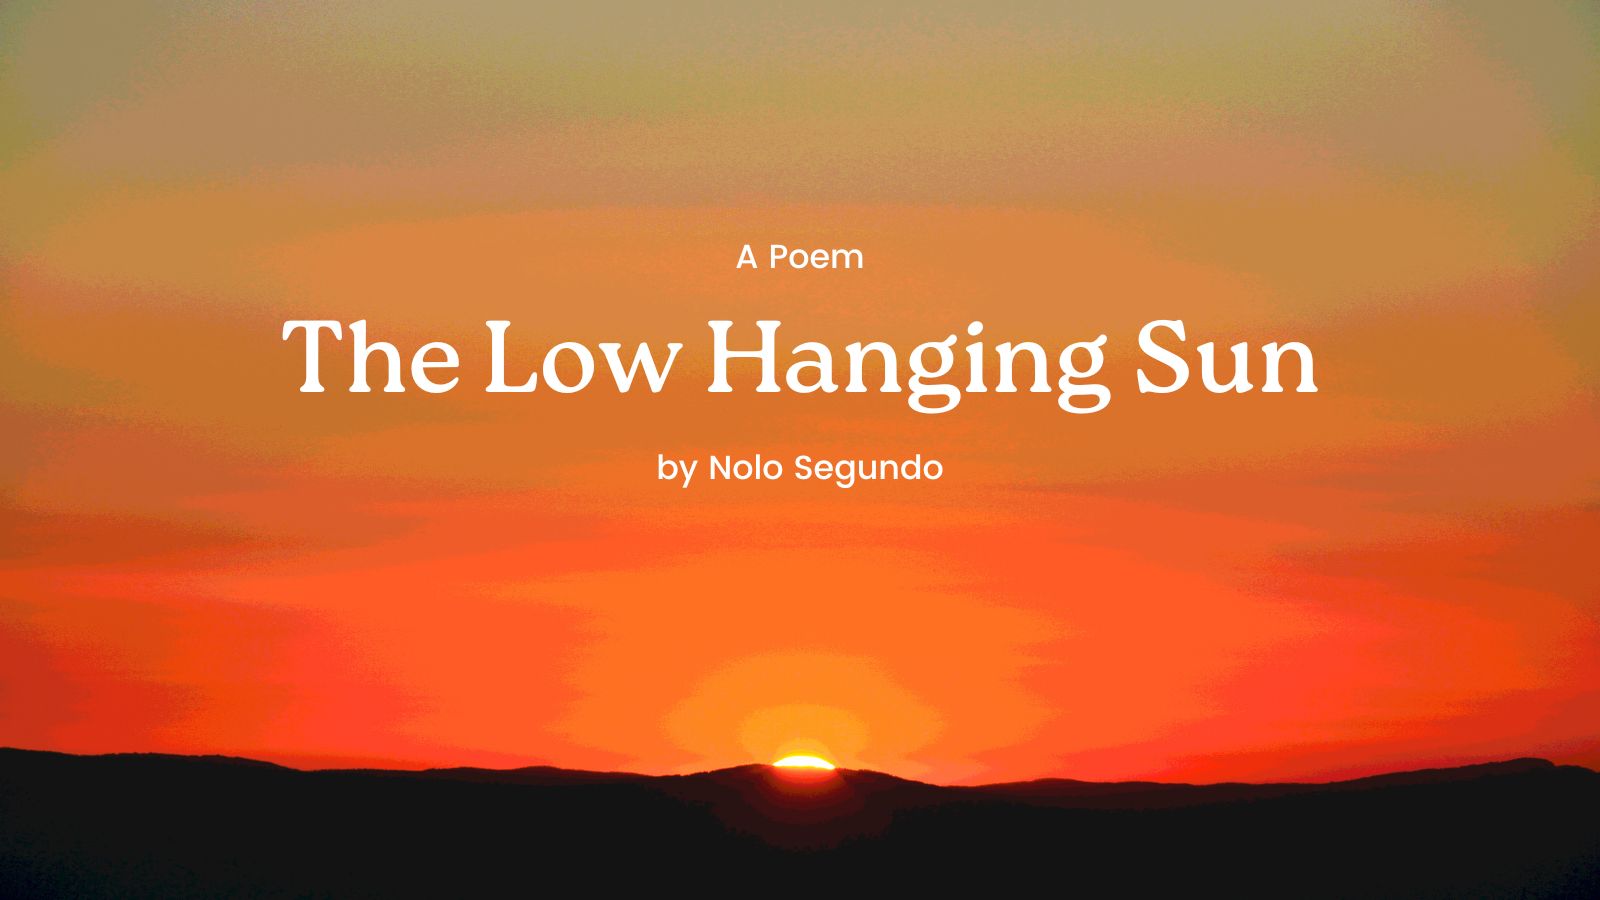 The Low Hanging Sun